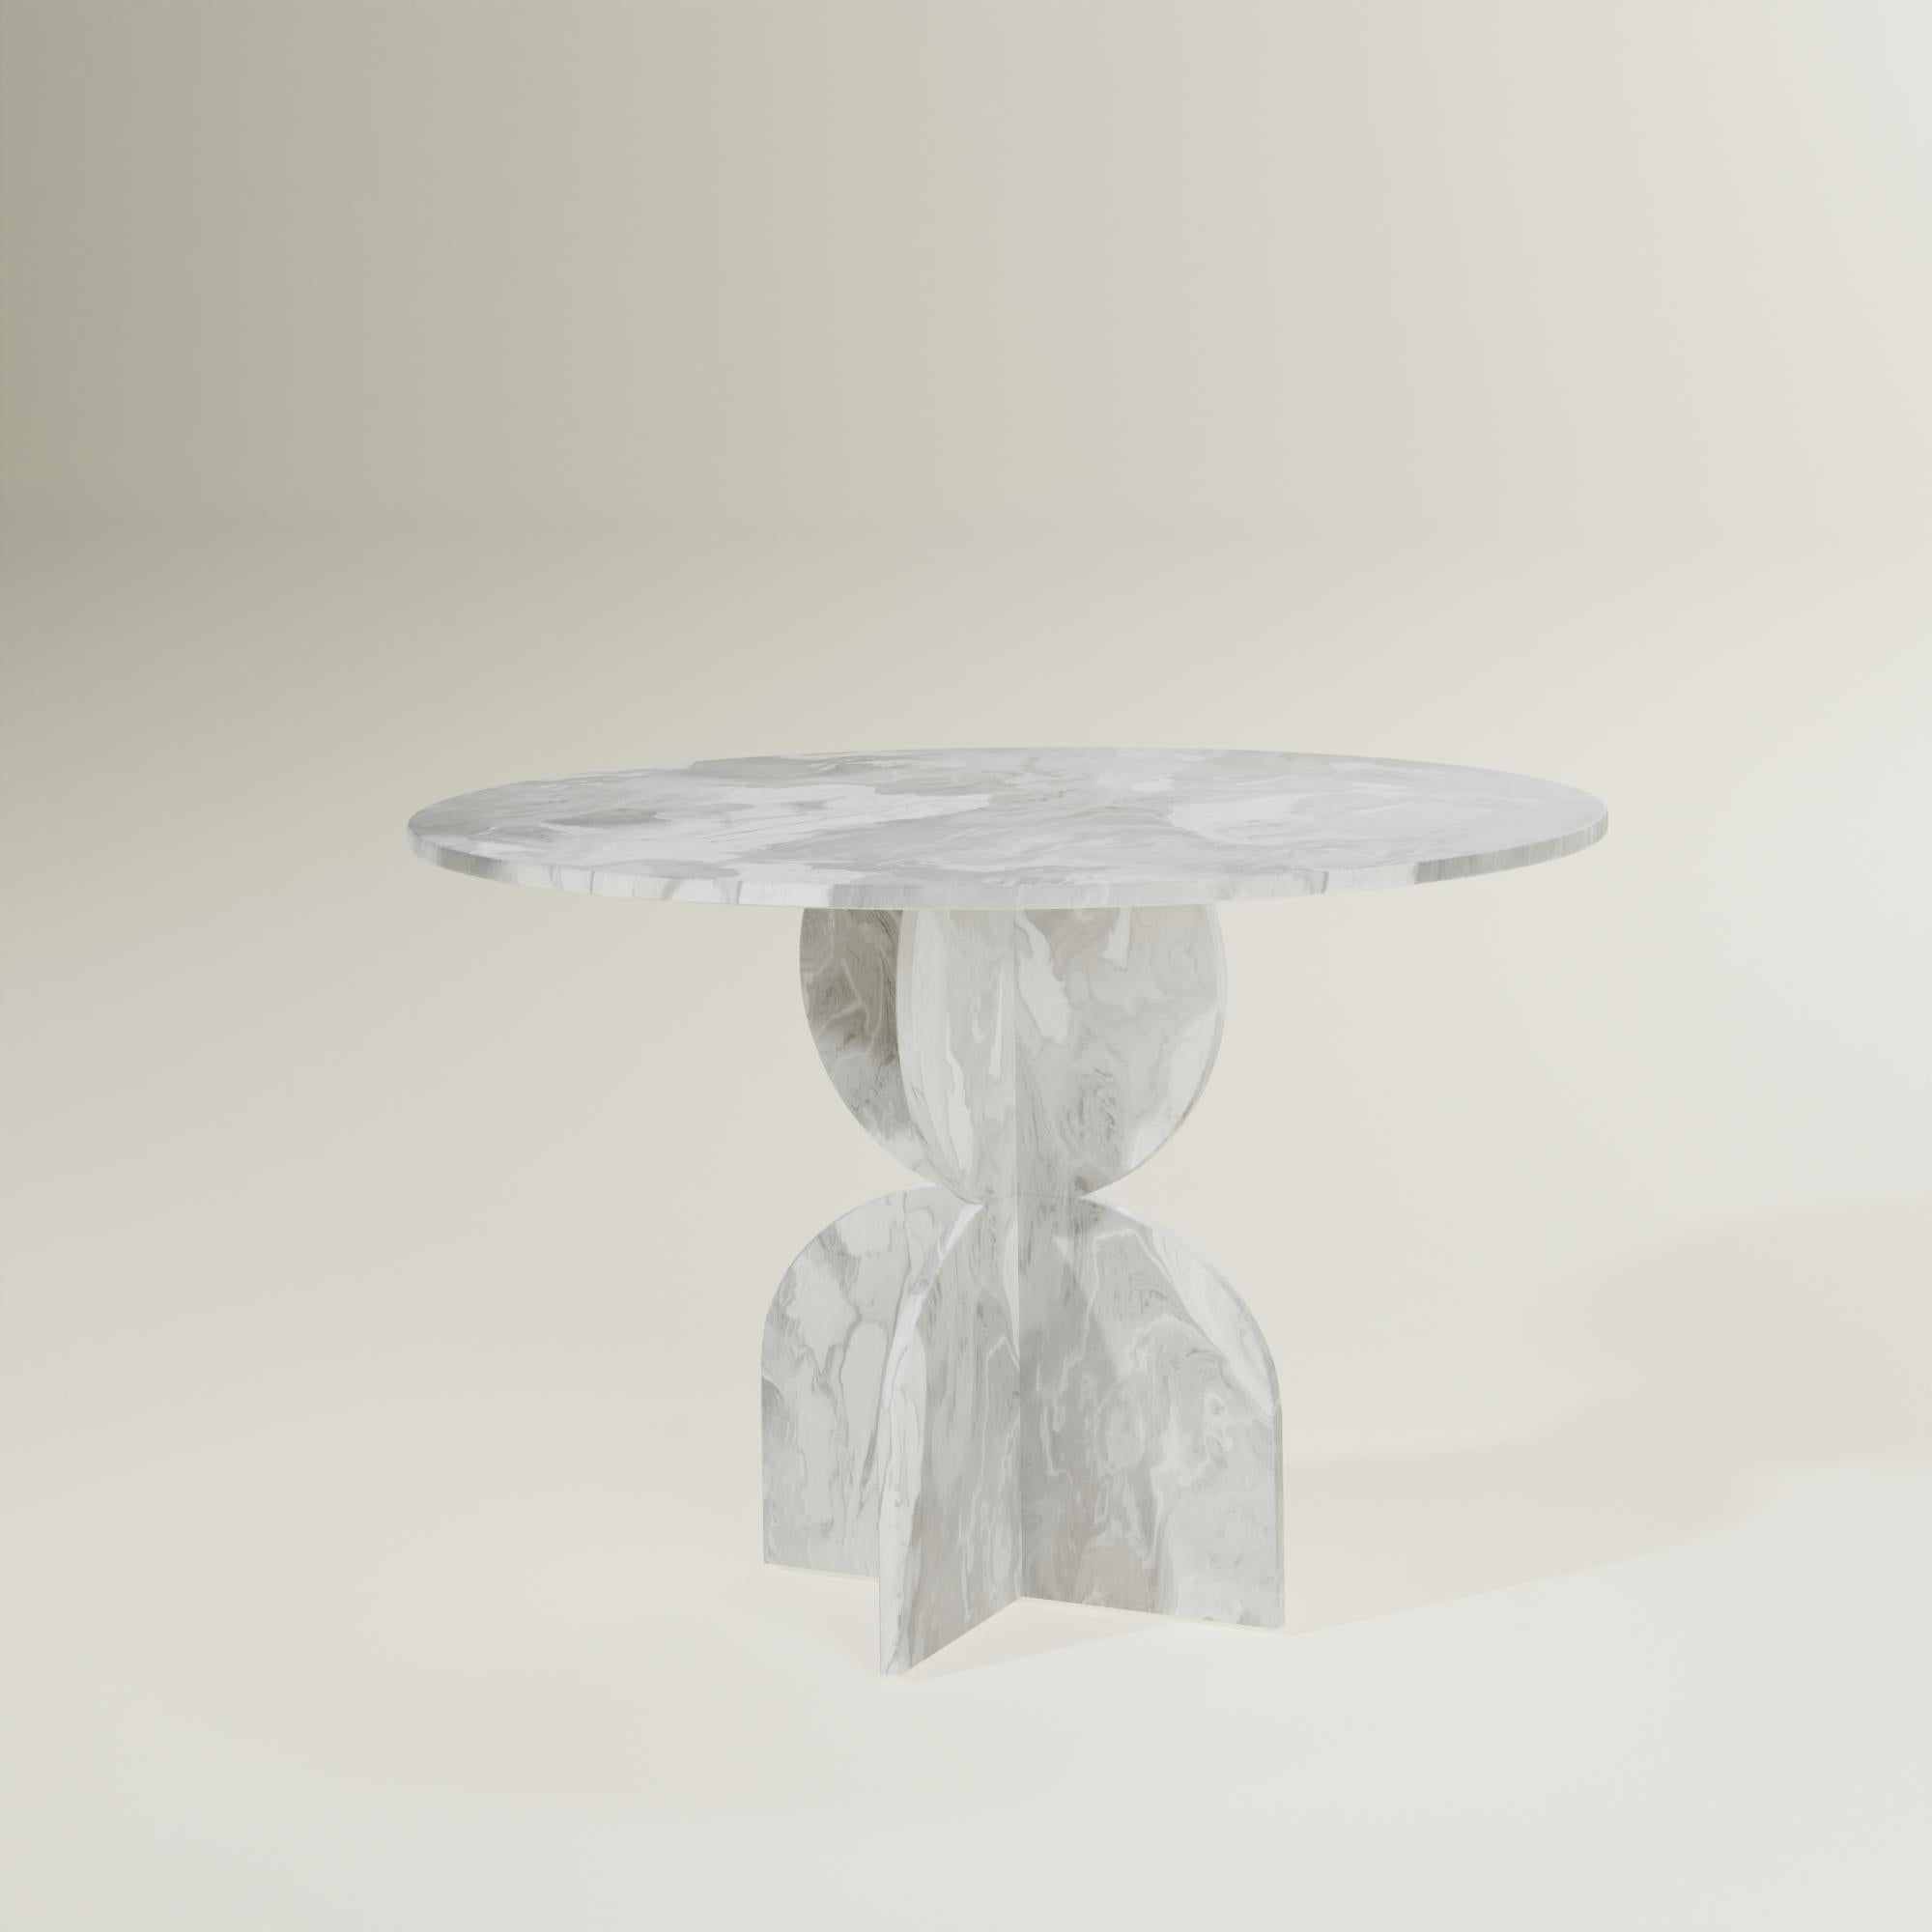 Contemporary white grey round table hand-crafted 100% recycled plastic by Anqa Studios
Incredible conversations happen around incredible tables. ANQA Studios round table is a geometrically shaped table with a design inspired by the brutalist